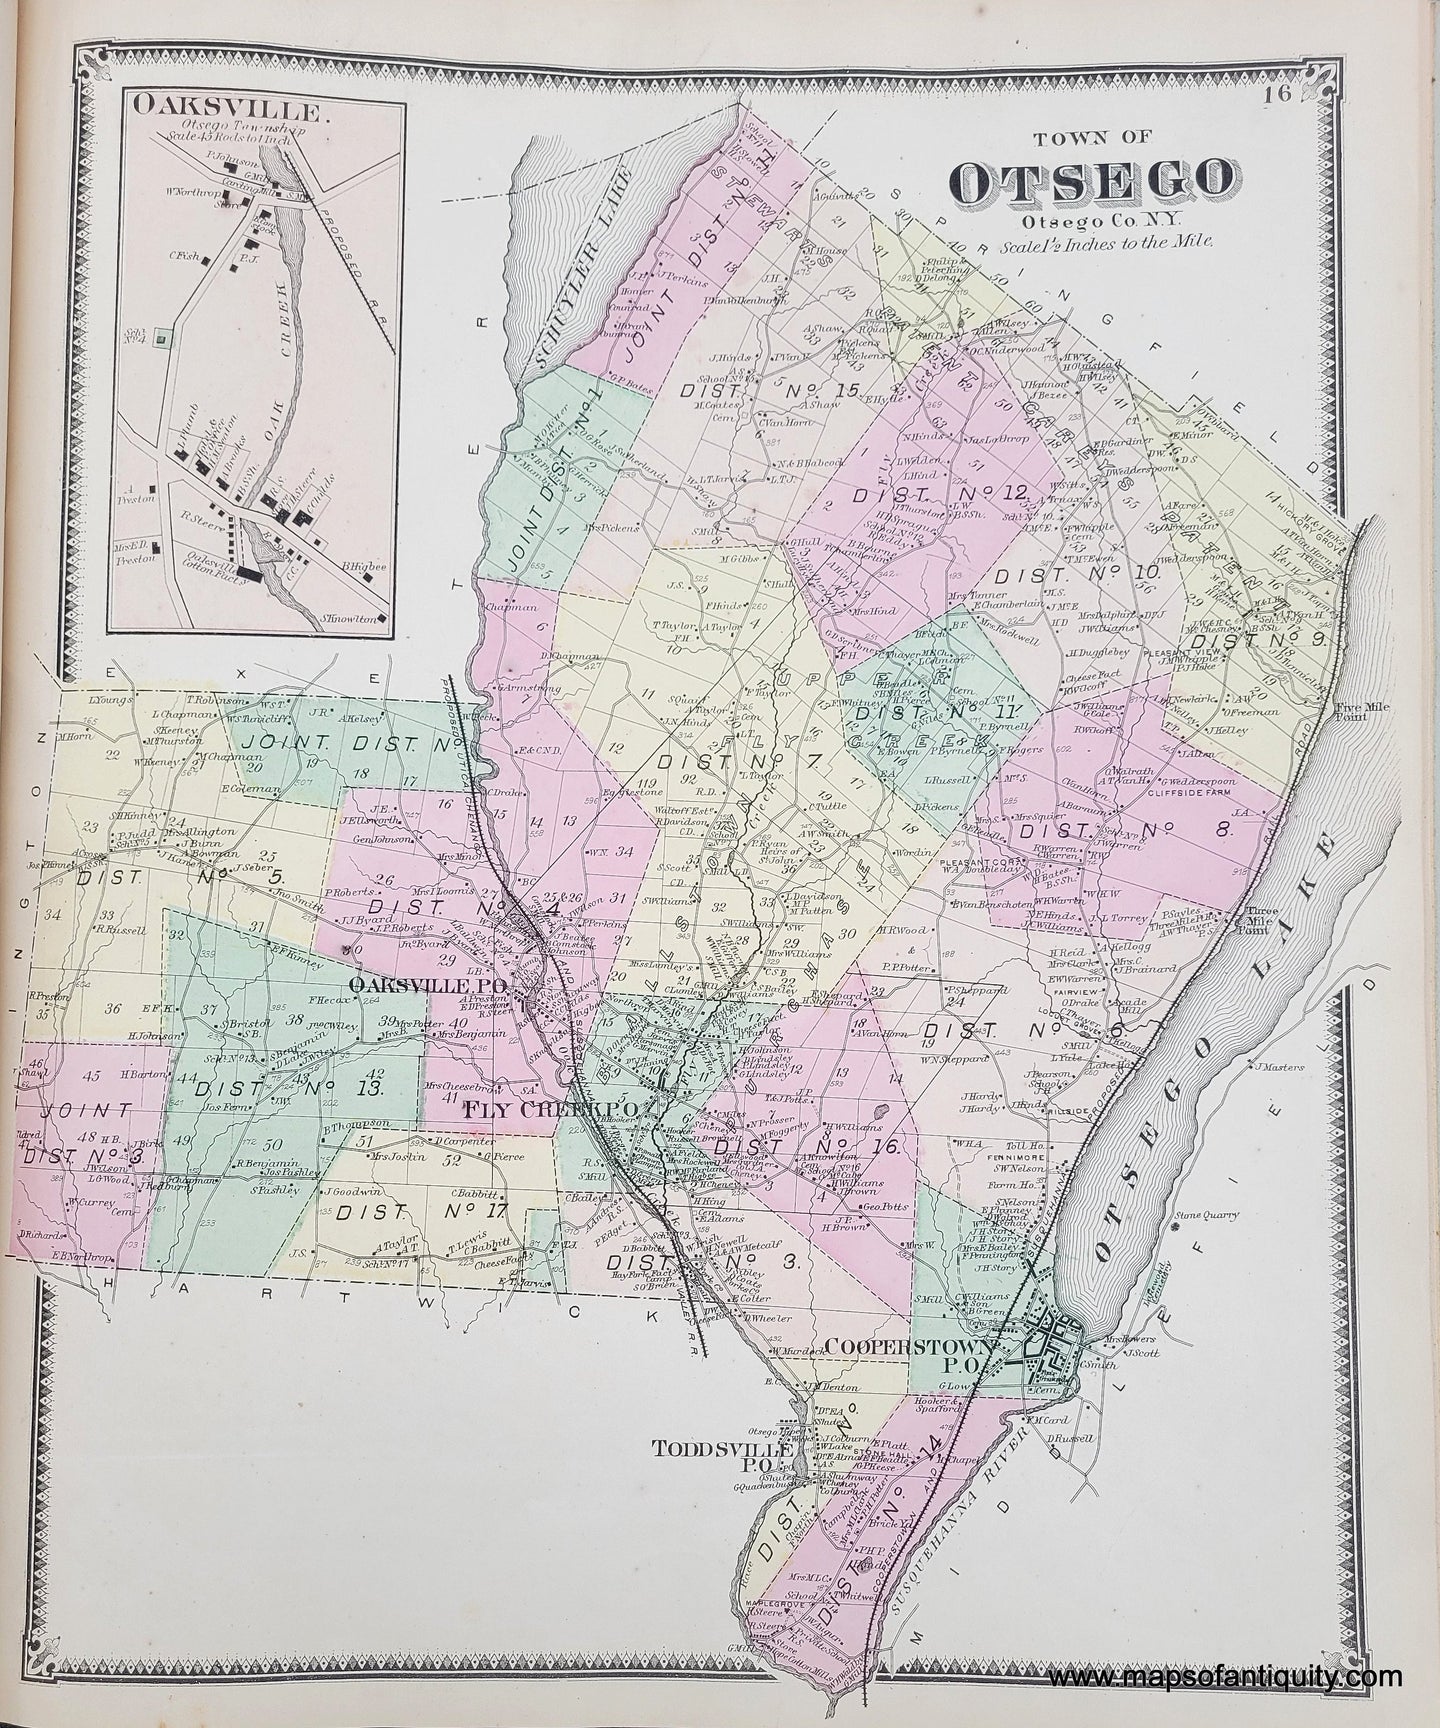 Genuine-Antique-Map-Town-of-Otsego-Otsego-Co-NY-1868-Beers-Ellis-&-Soule-Maps-Of-Antiquity